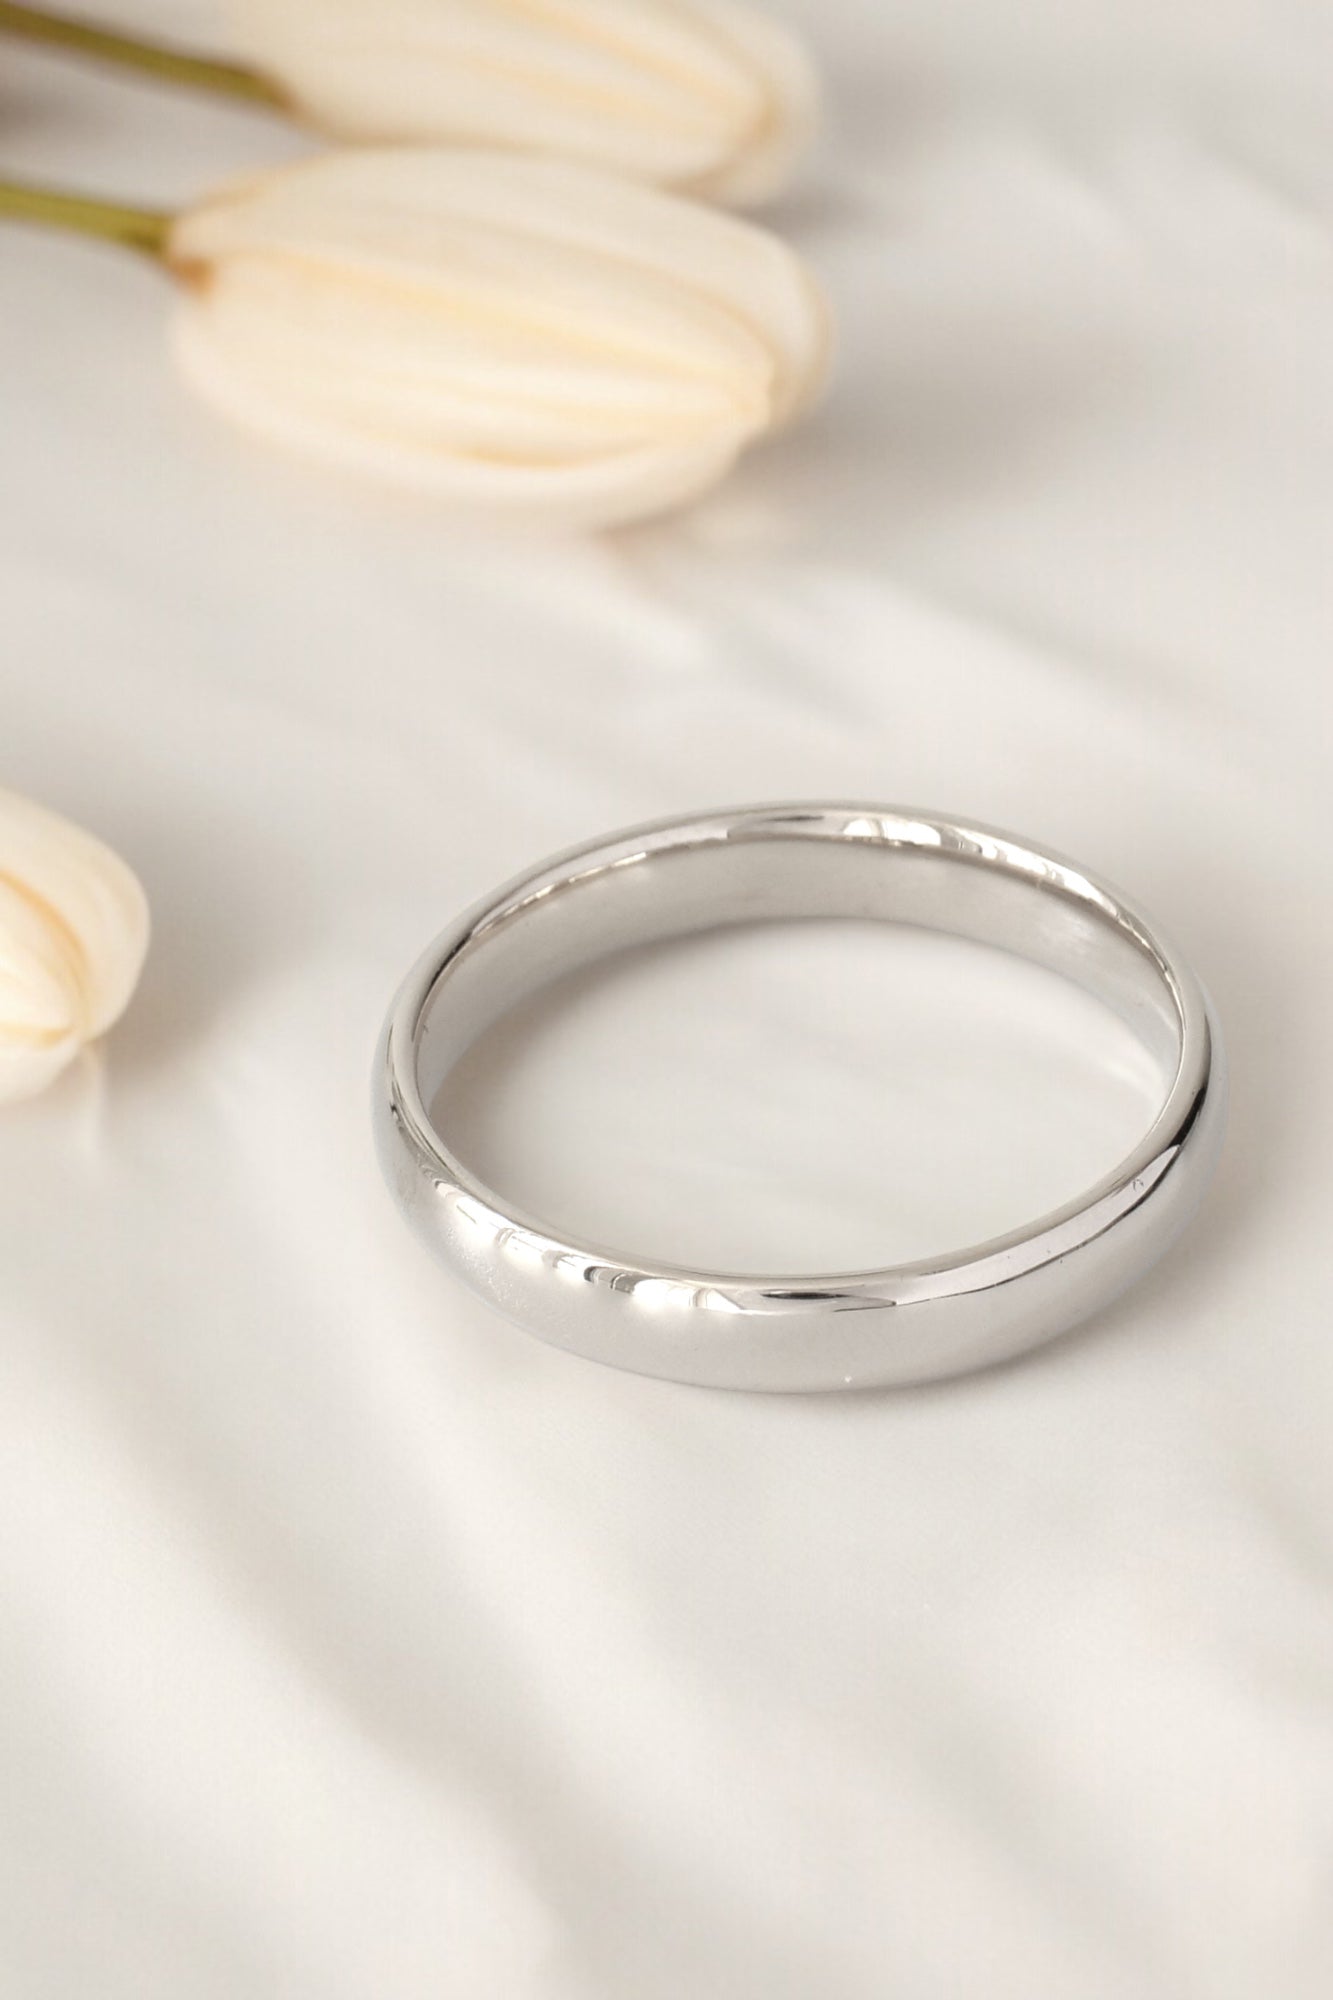 READY TO SHIP: White gold classic wedding band, AVAILABLE RING SIZES - 8US, 9US, 10US, 11US - Eden Garden Jewelry™